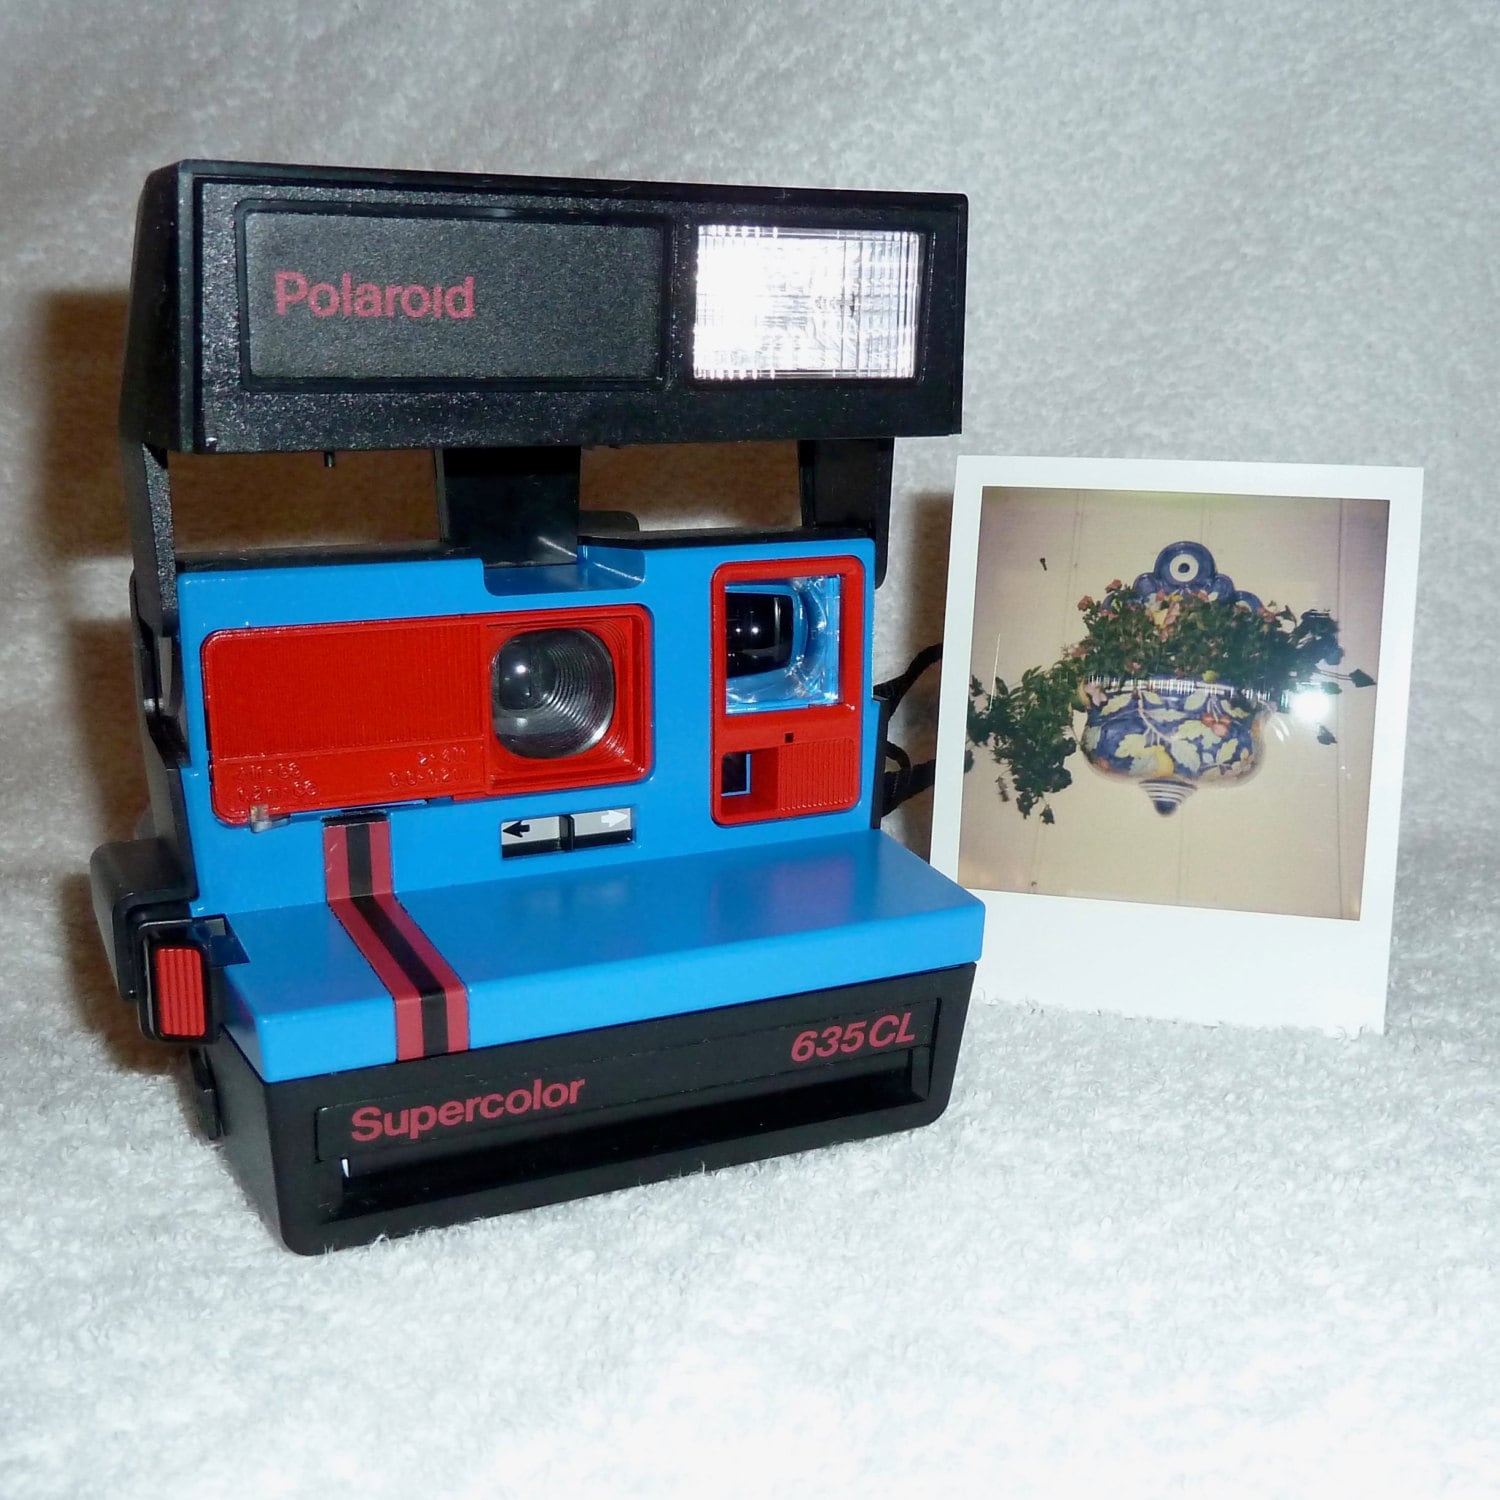 Polaroid Supercolor 635CL Red Stripe with Close Up Lens - Works